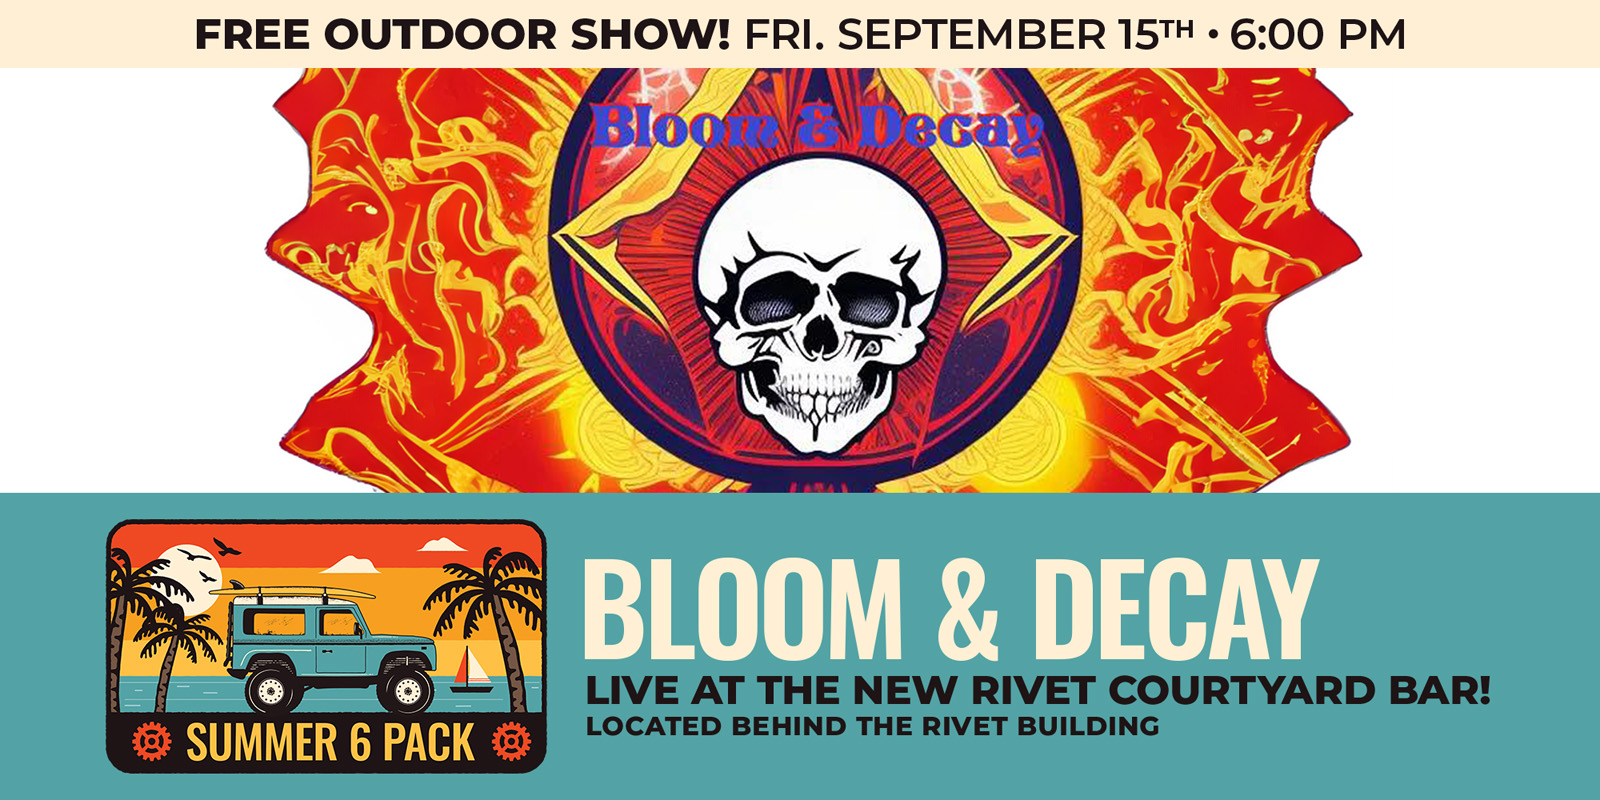 The Rivet Free Outdoor Series continues! Live on the Courtyard Bar Stage: Bloom and Decay! This is a FREE show! The bar opens at 6 PM. Music 7 - 10 PM.